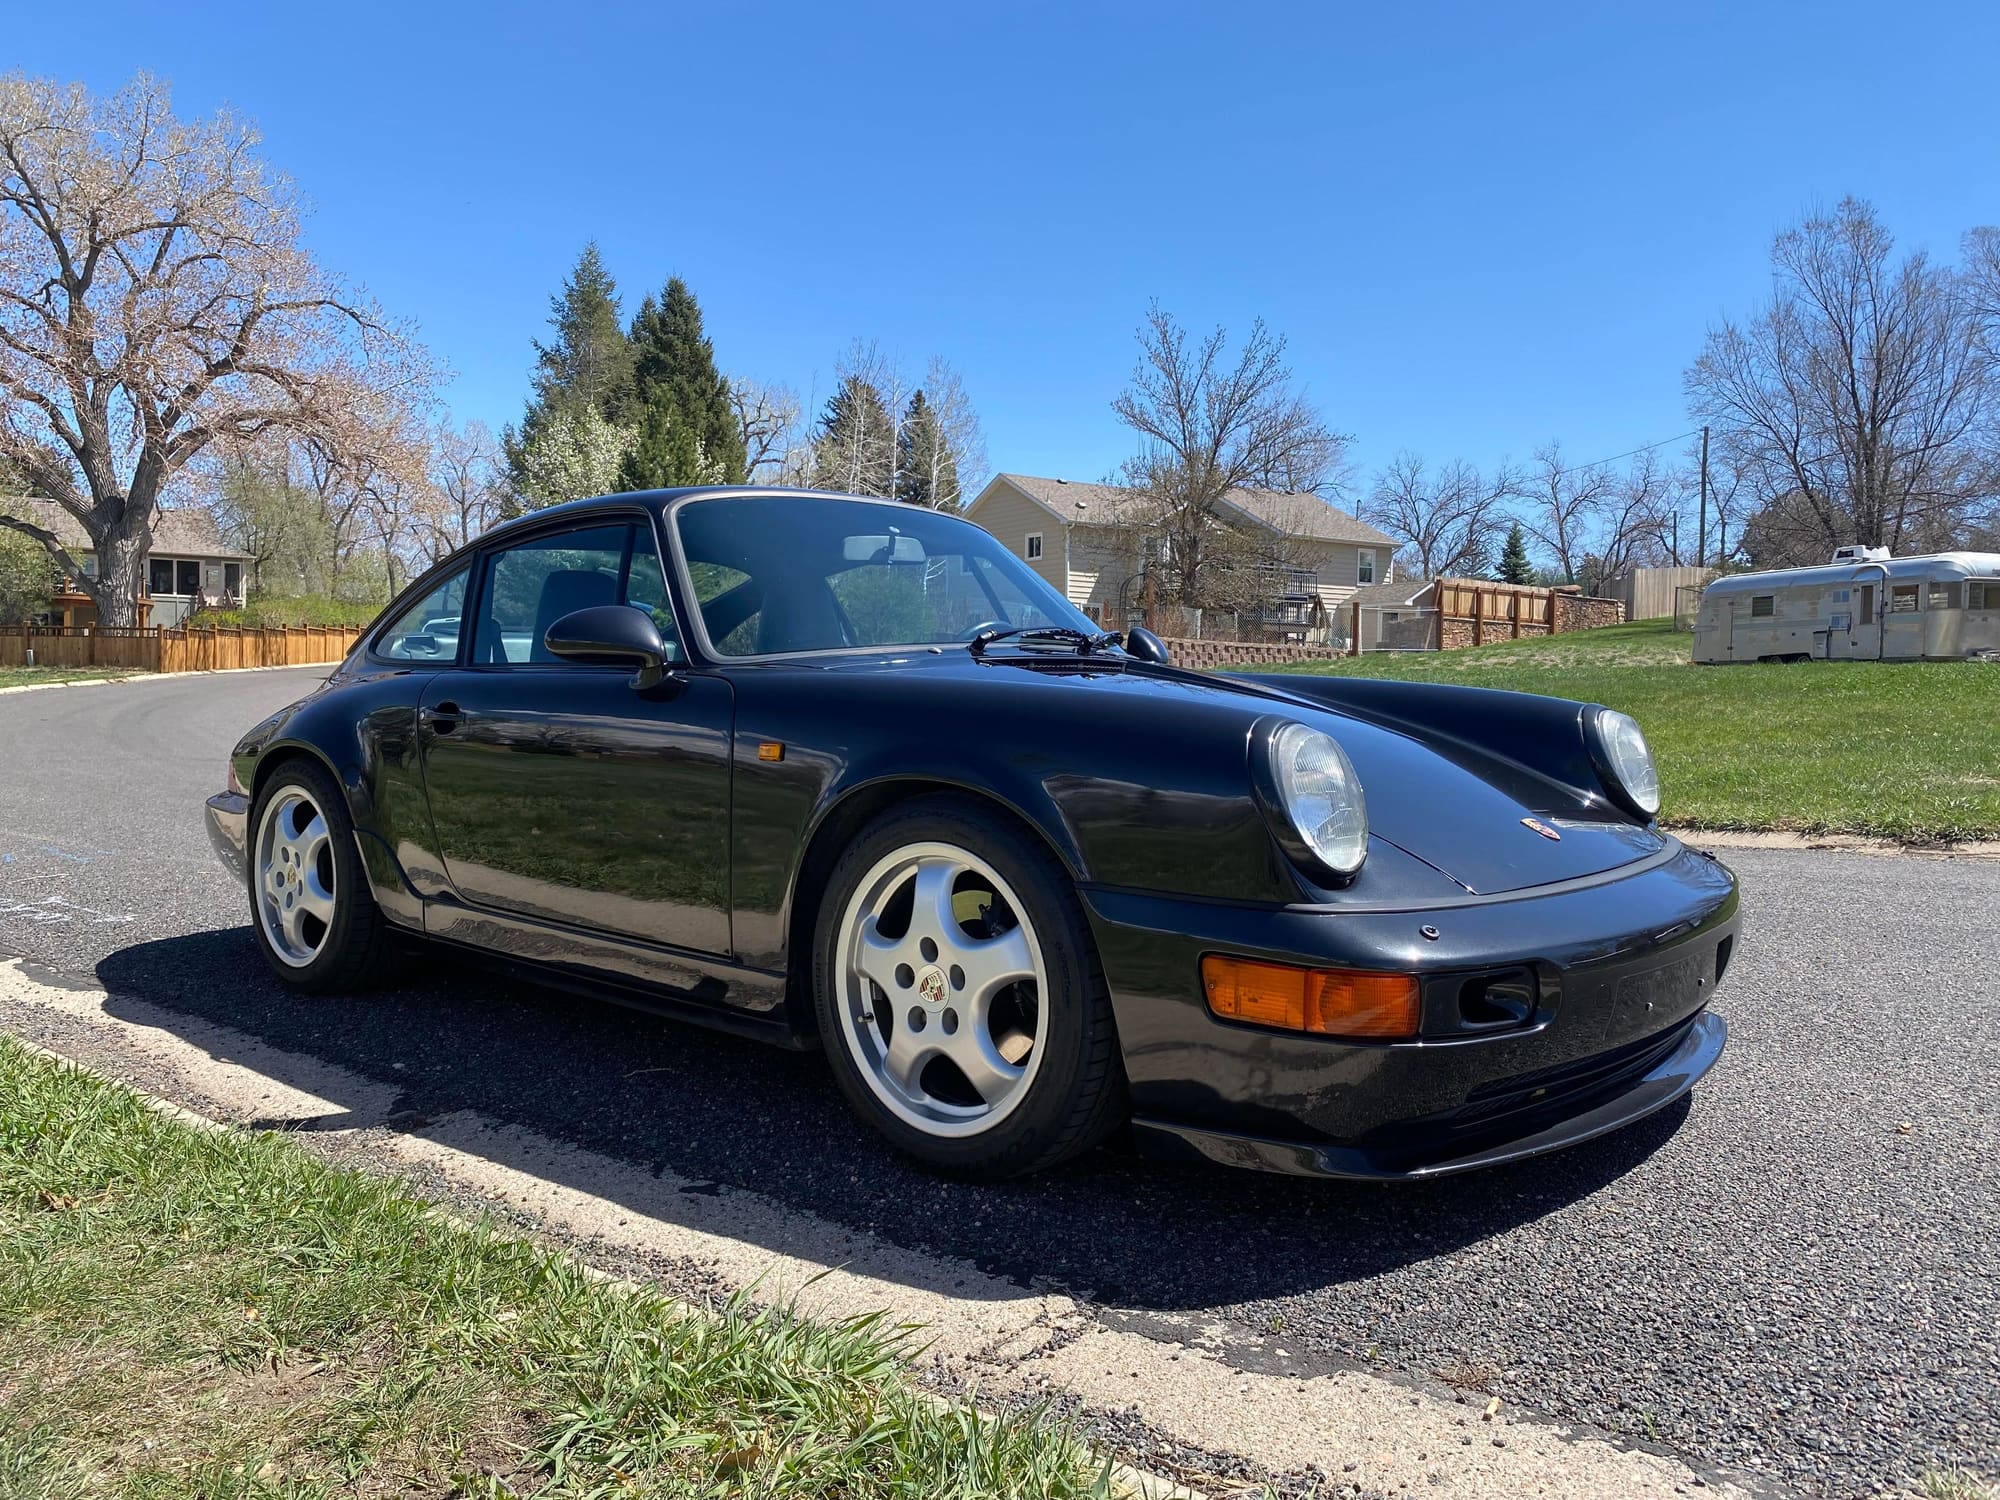 1990 Porsche 911 - 1990 ROW 964 Carrera 2 - Used - VIN WP0ZZZ96ZLS404418 - 66,362 Miles - 6 cyl - 2WD - Manual - Coupe - Black - Fort Collins, CO 80525, United States